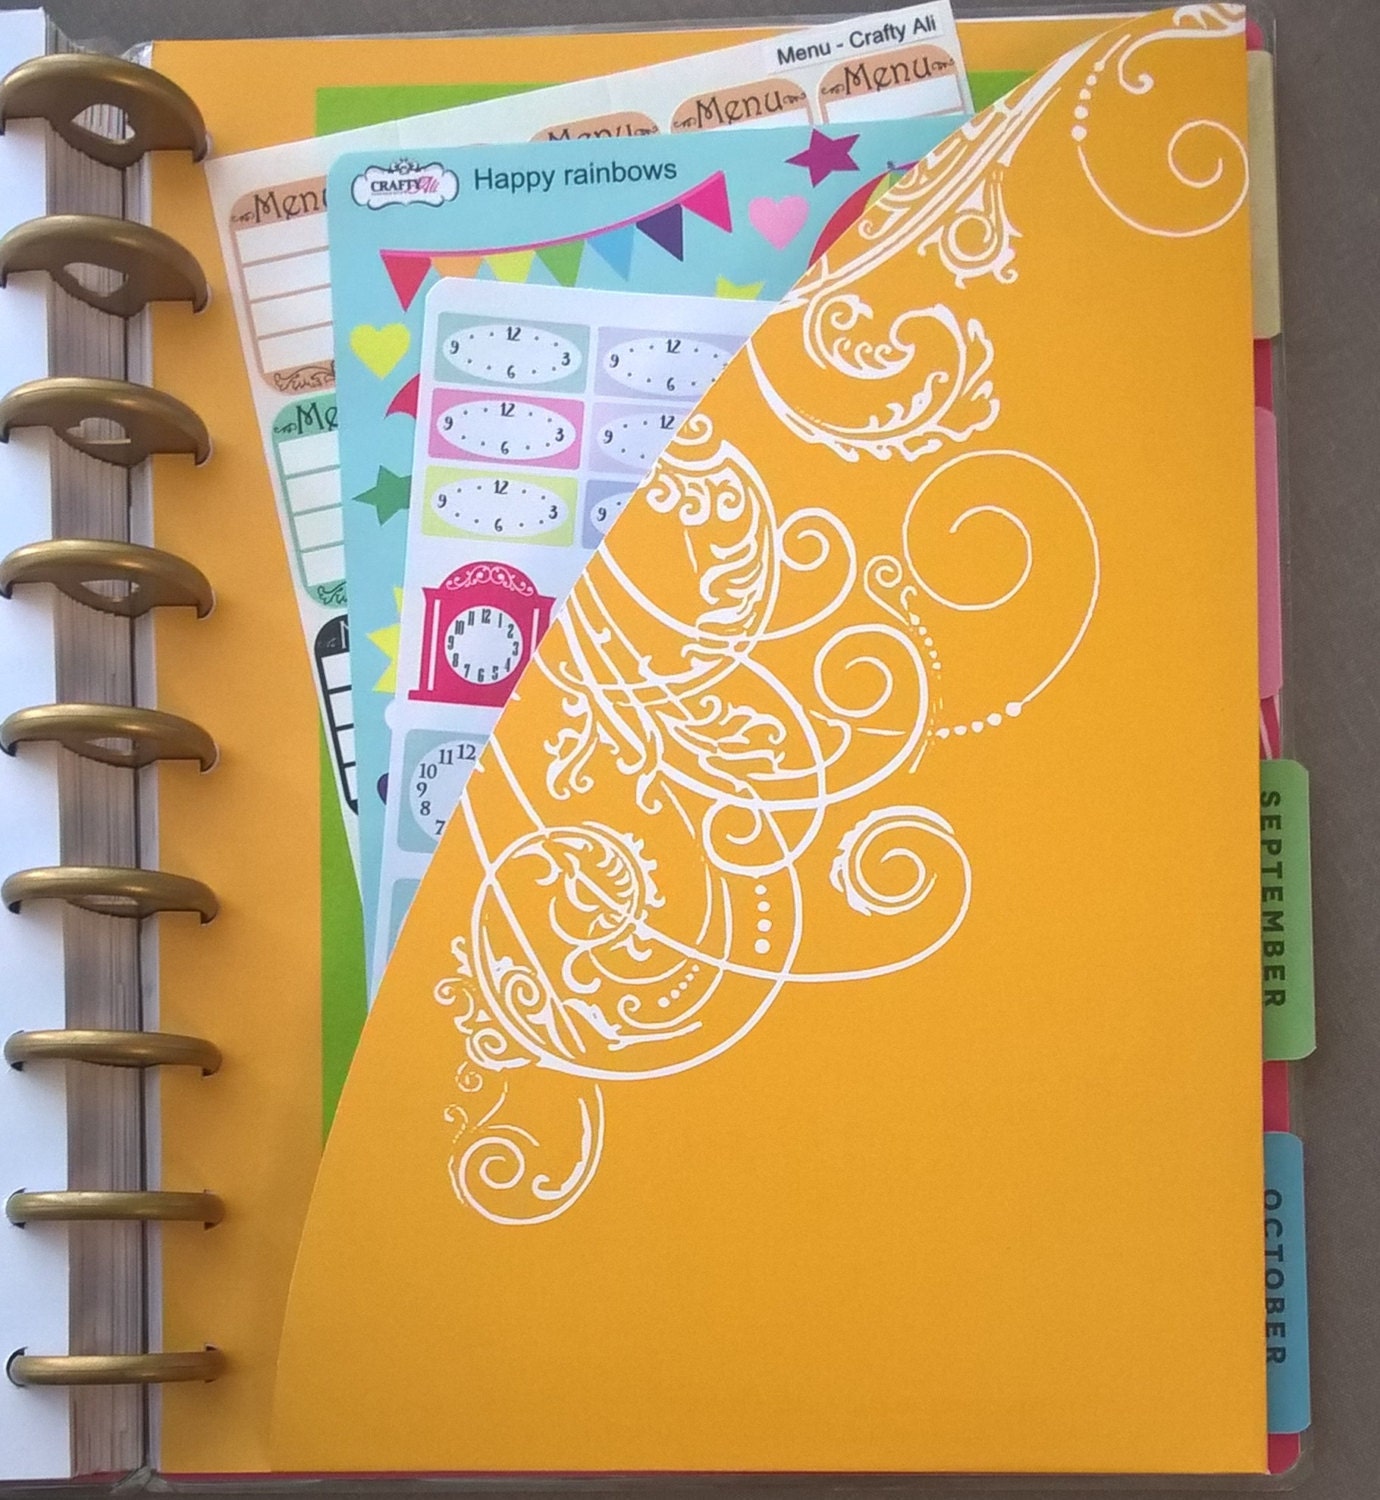 Pocket Folder for Happy Planners / Planner Accessories / Planner Pockets 